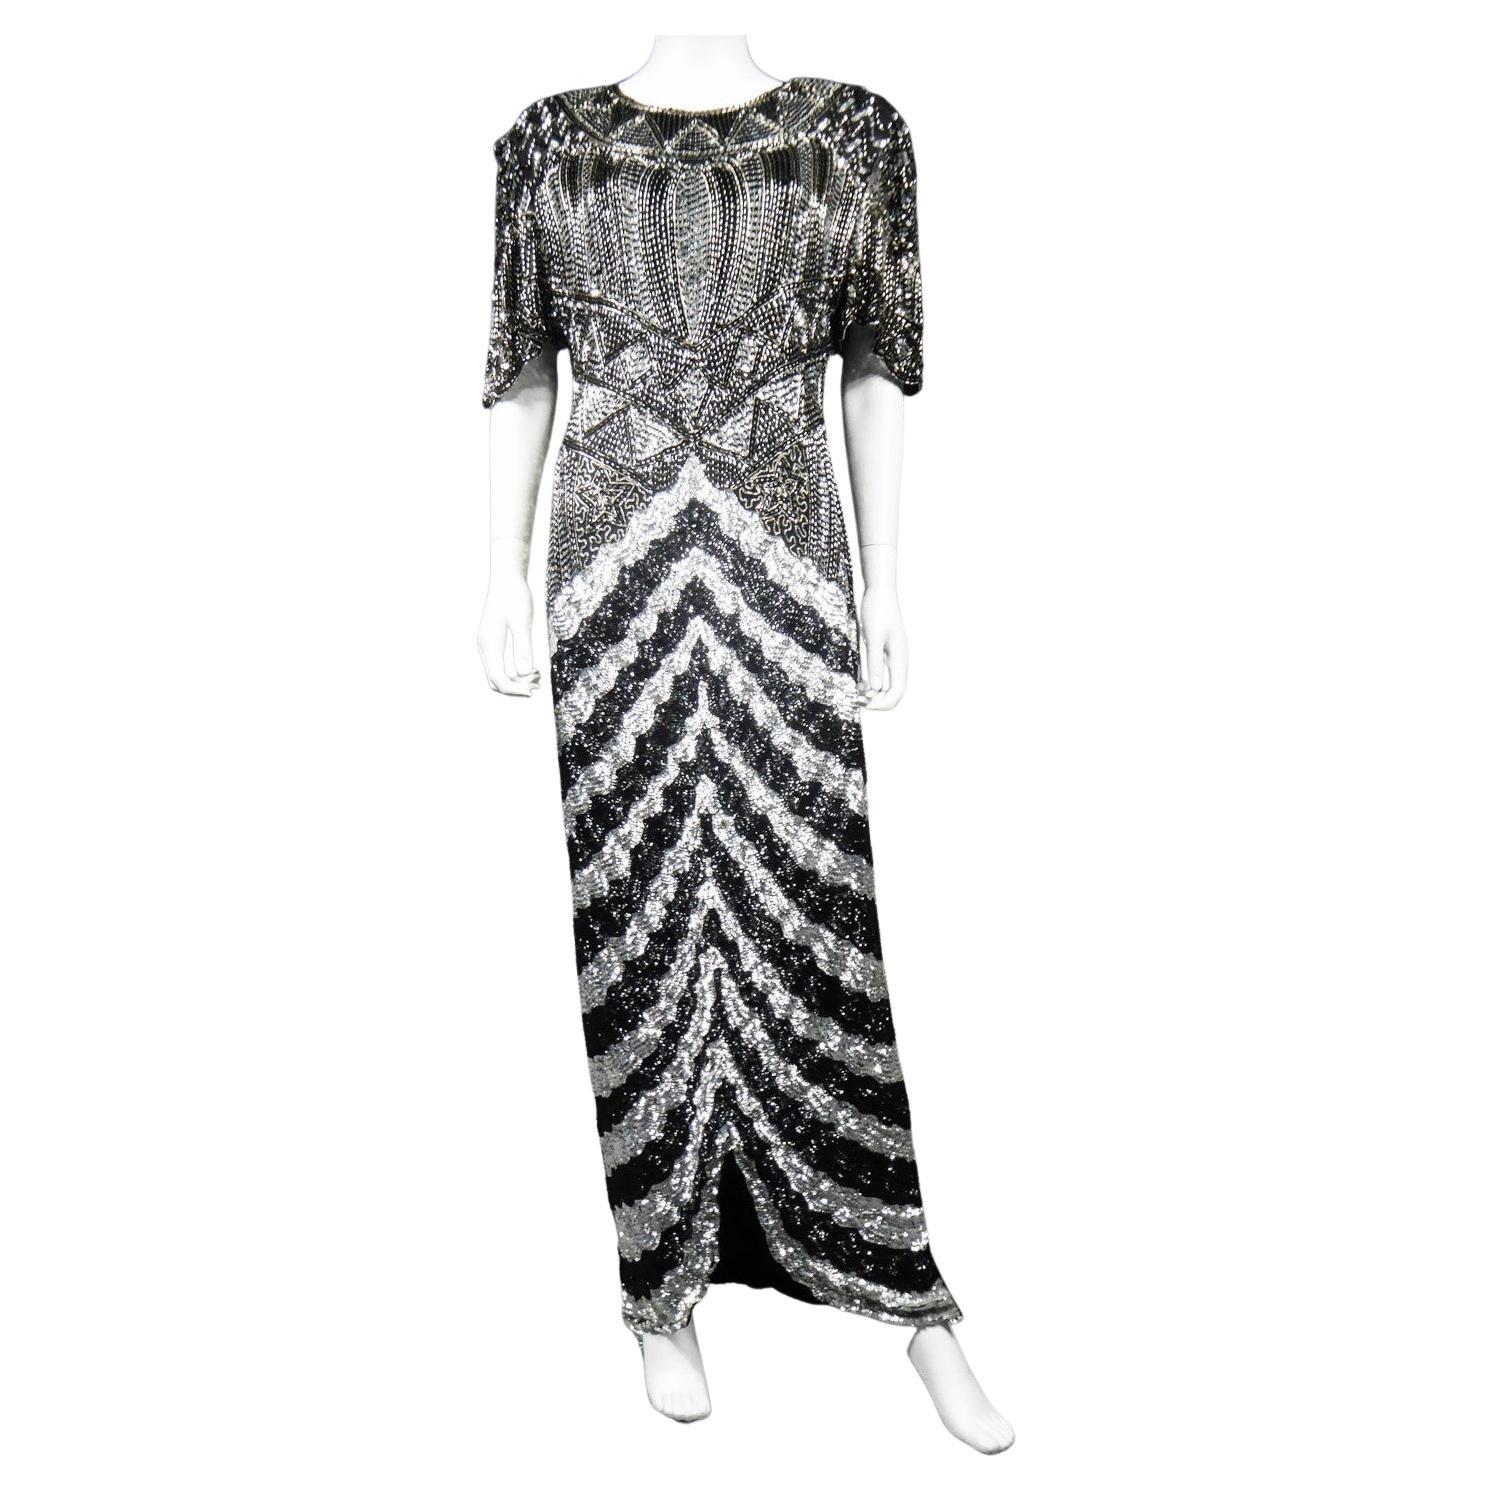 Music-Hall Evening Dress Embroidered with Black and Silver Sequins Circa 1980 For Sale